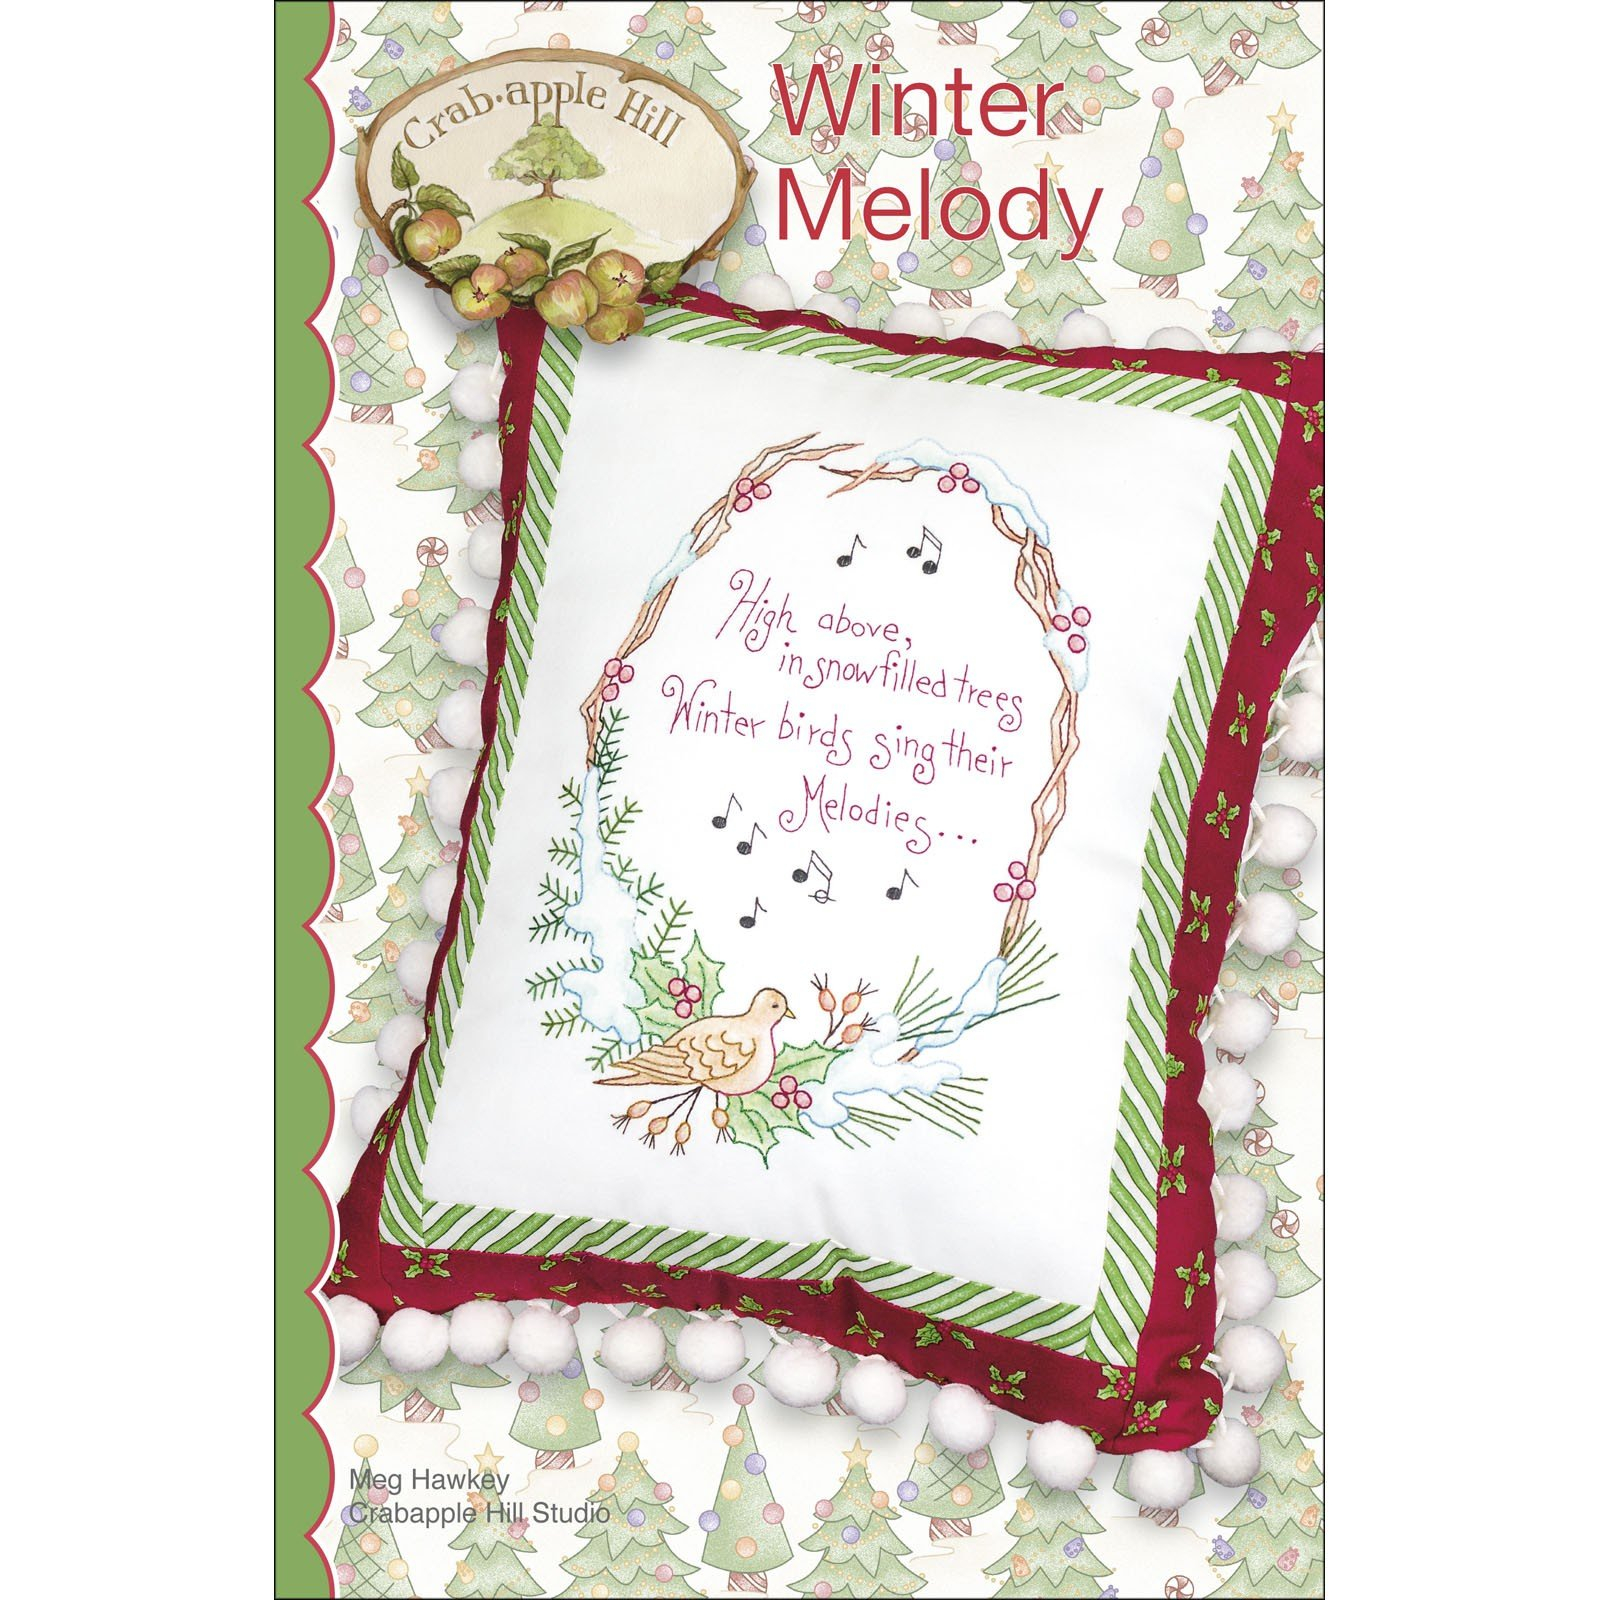 Crabapple Hill Embroidery Patterns Winter Melody Pillow Crabapple Hill Studio 448 875352003876